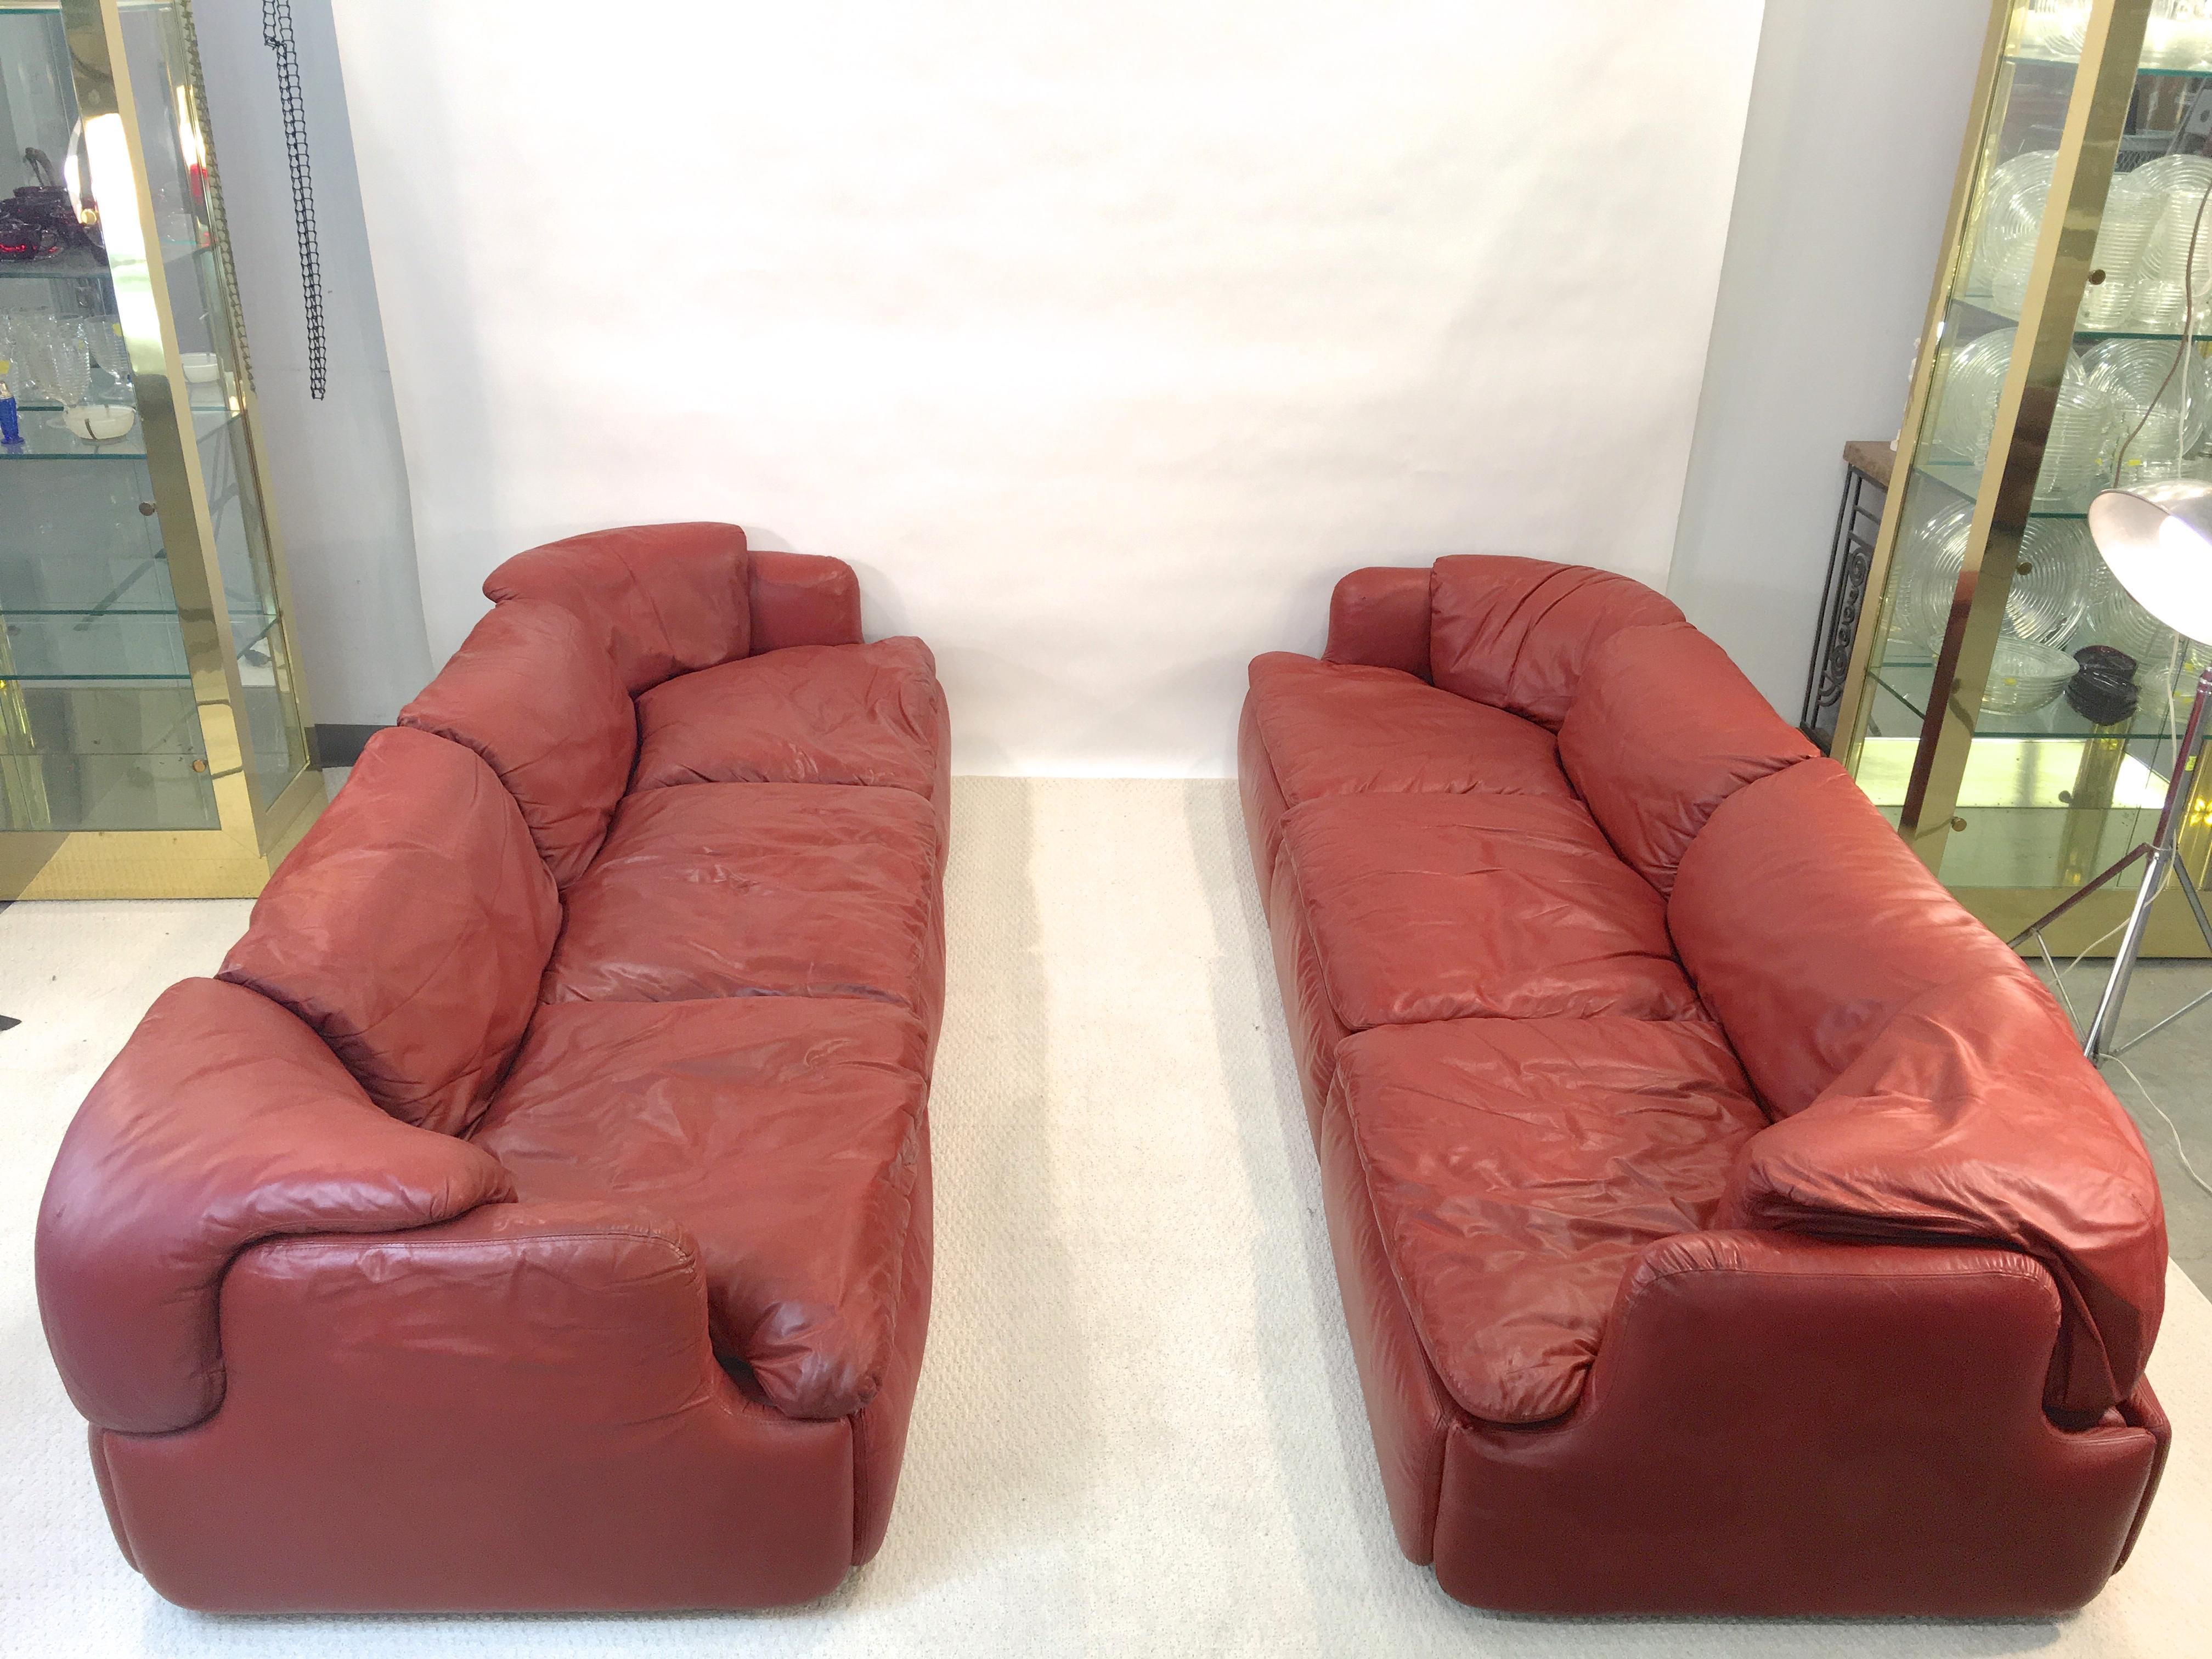 
We have ONE brick red/cordovan leather sofa and matching armchair. Two pieces total. (The second sofa has been sold).

Price shown is for the sofa and the chair together.

An important pair of leather three-seat sofas and lounge chair designed by